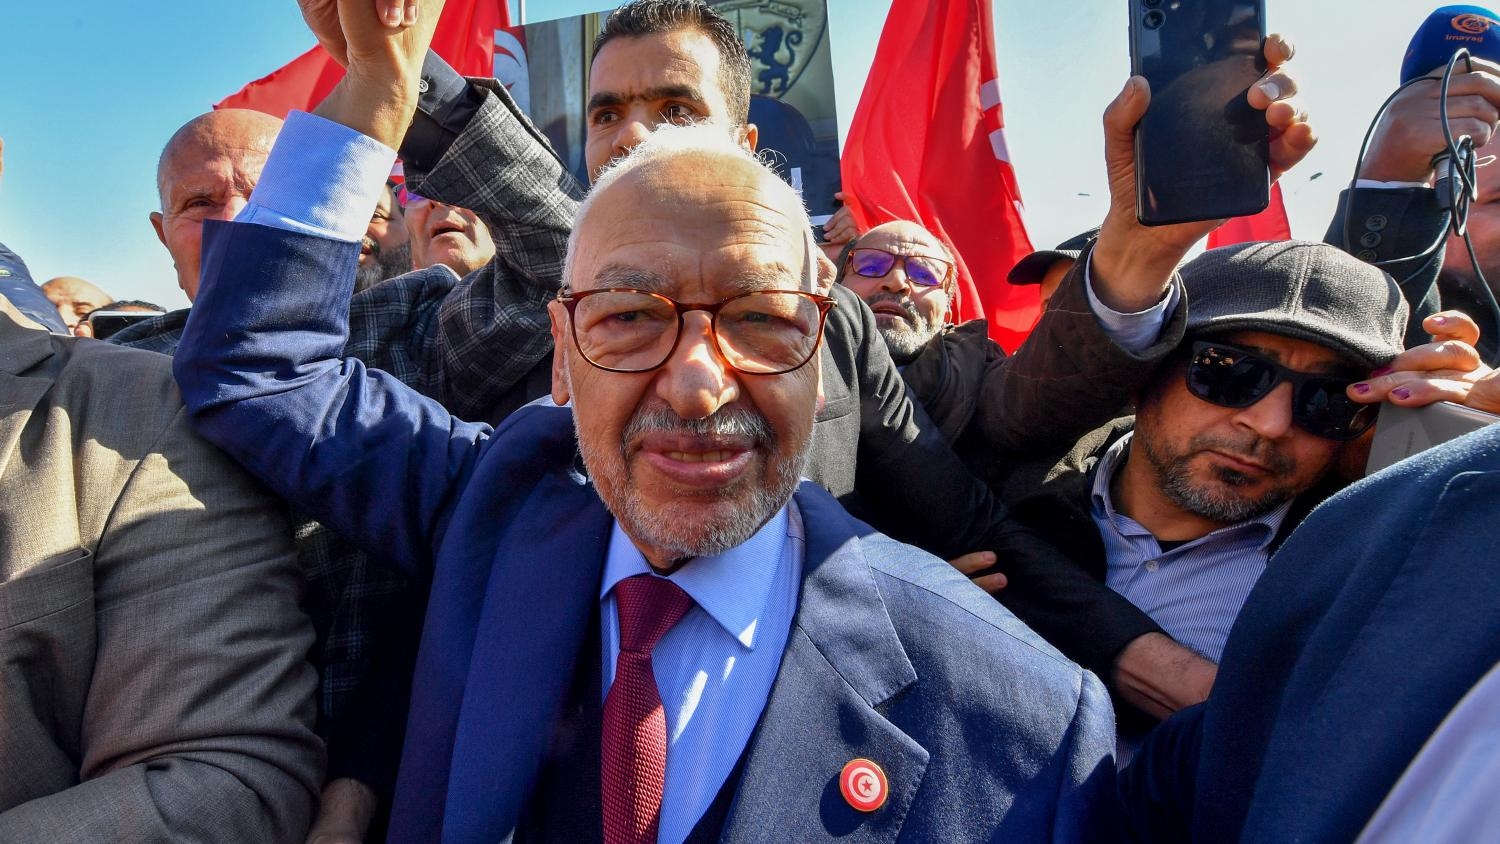 Ghannouchi is the highest-profile and the latest member of the Ennahda party to be arrested by Tunisian police.